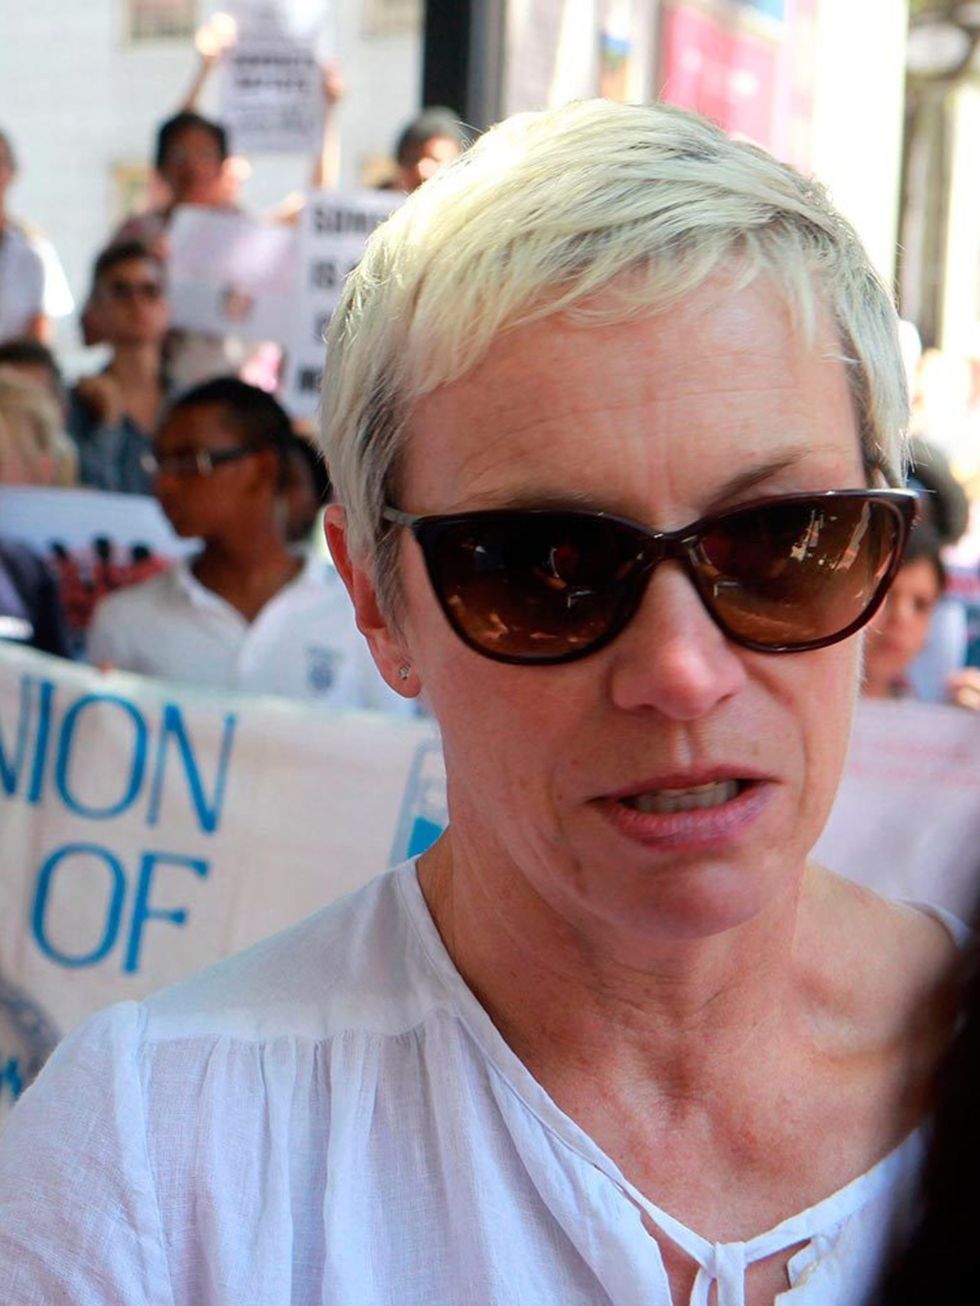 <p><strong>Annie Lennox, Musician and activist </strong></p>

<p>'It is important to inspire women to utilise the resources that they've got, and that's themselves. For me, feminism has to translate into empowerment for women around the globe. Of course I